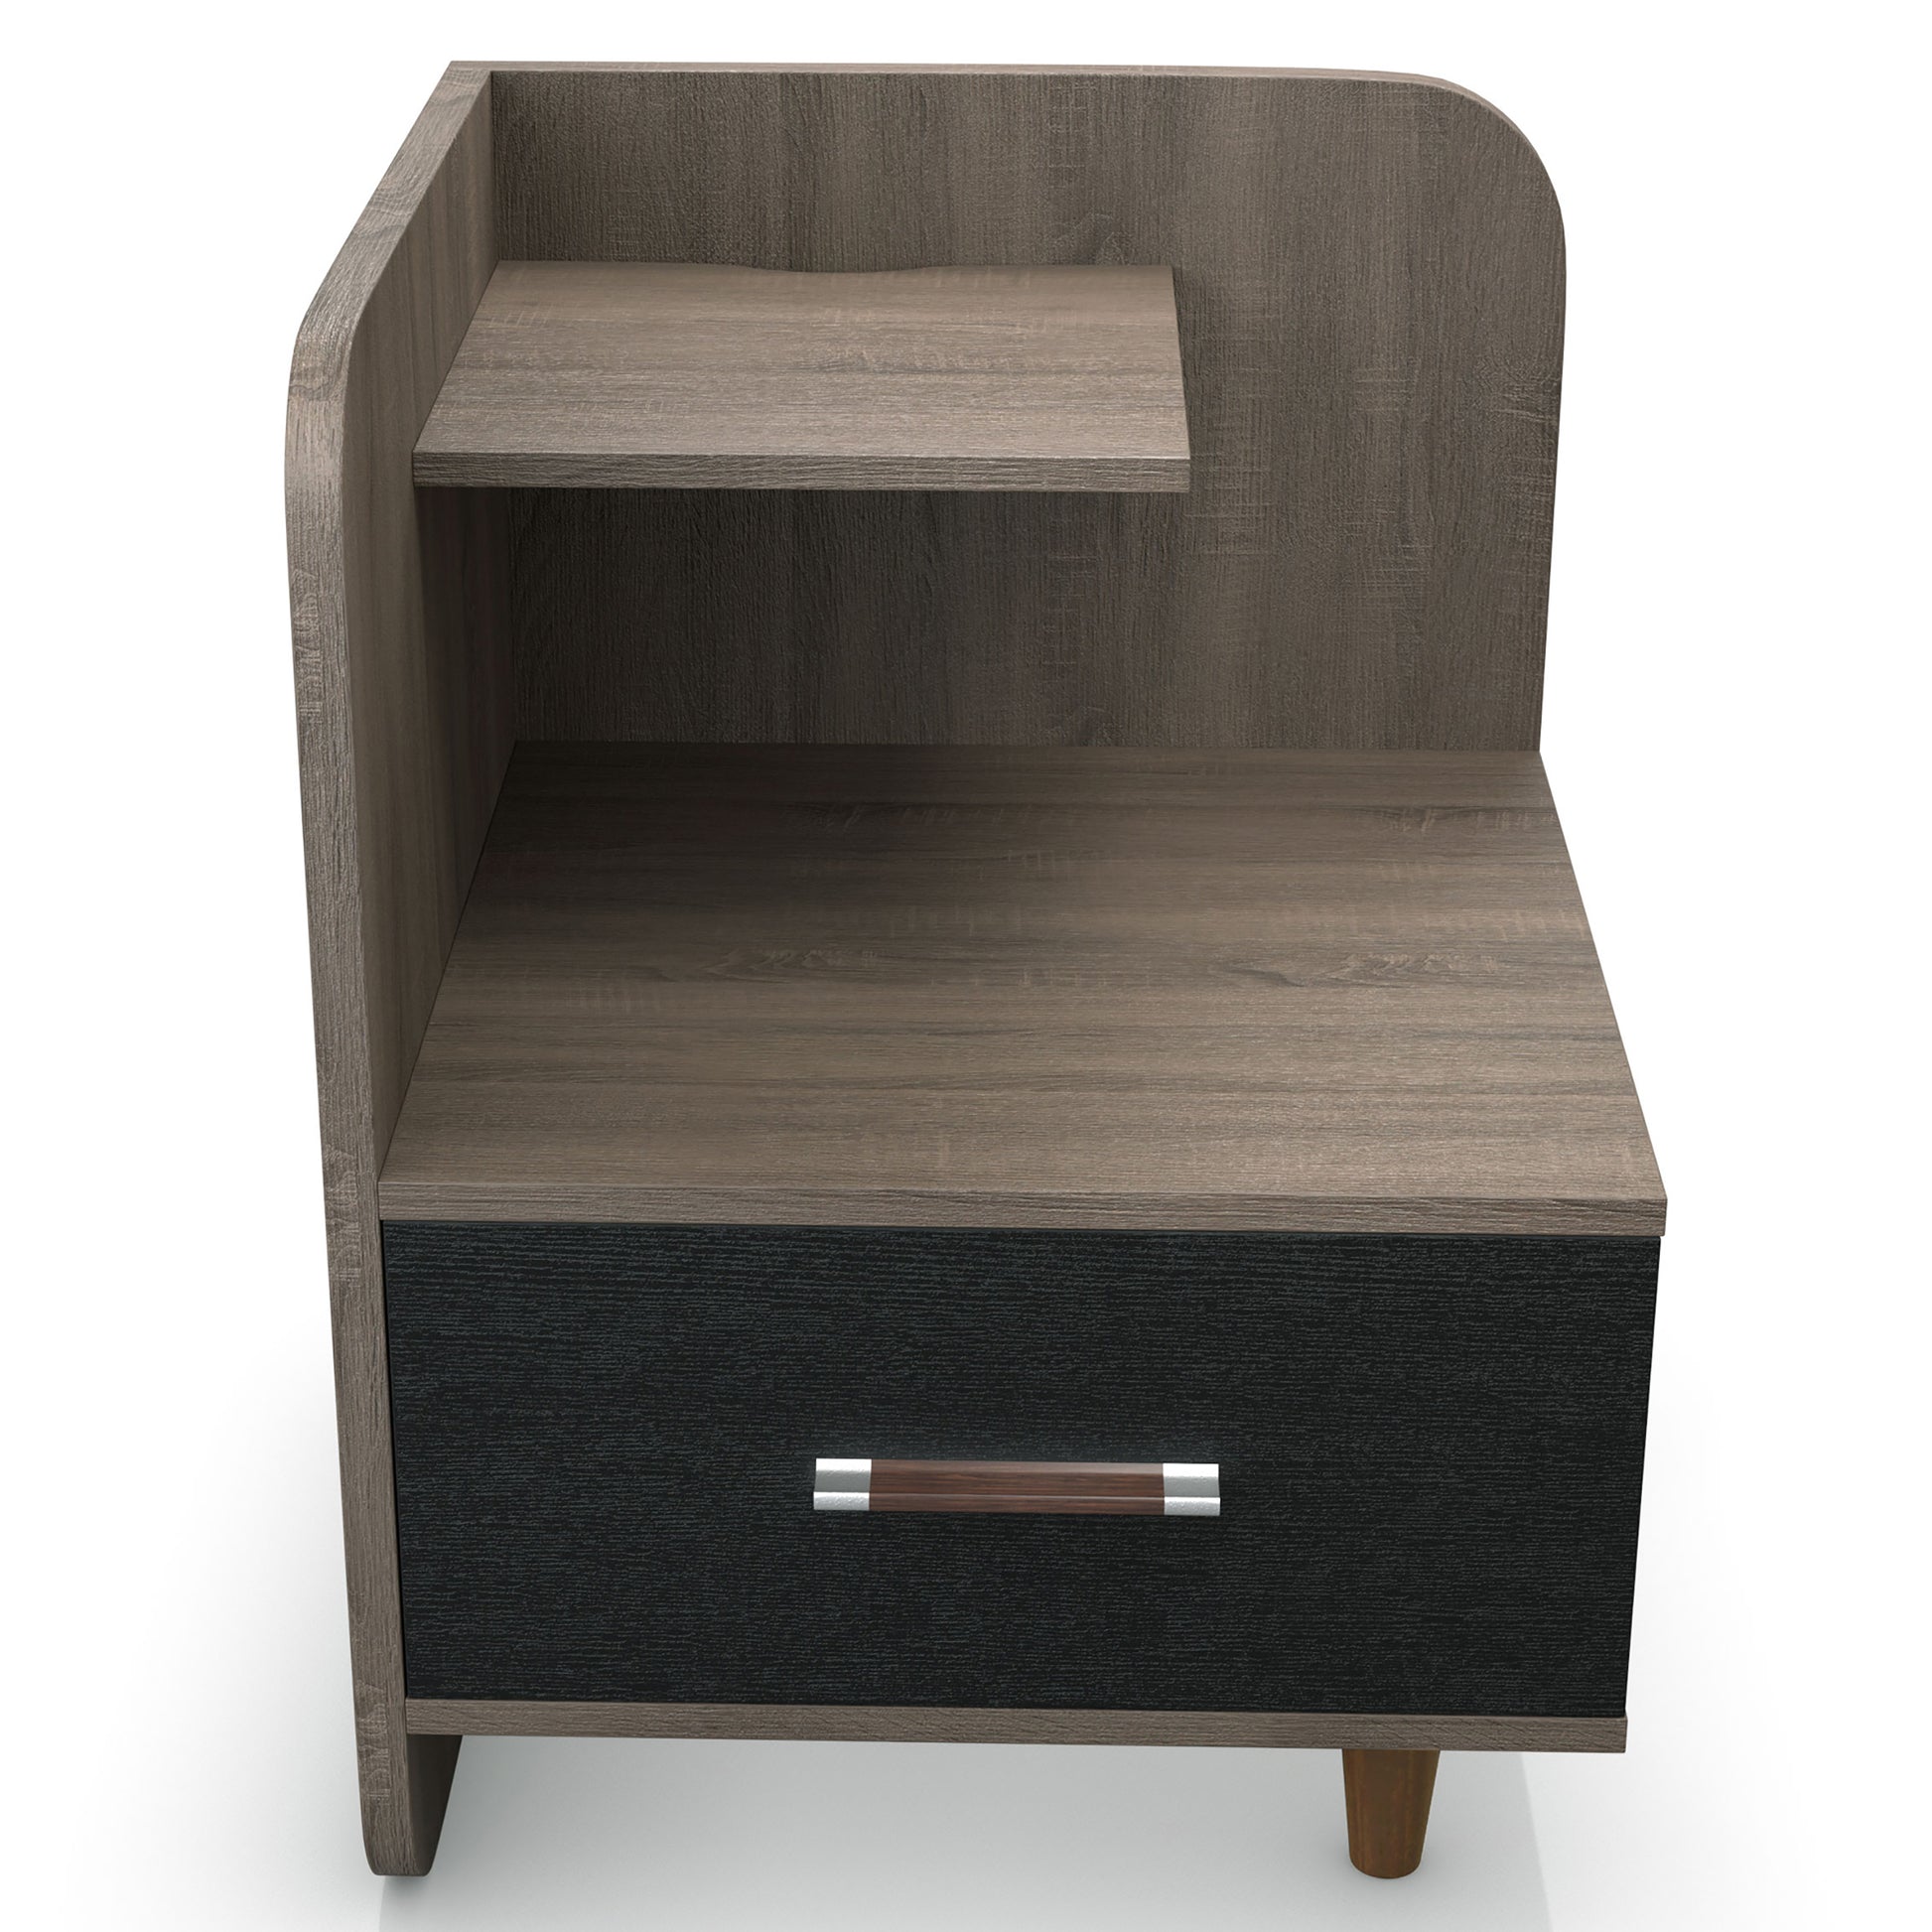 Front-facing contemporary chestnut brown one-drawer nightstand with a mini shelf on a white background